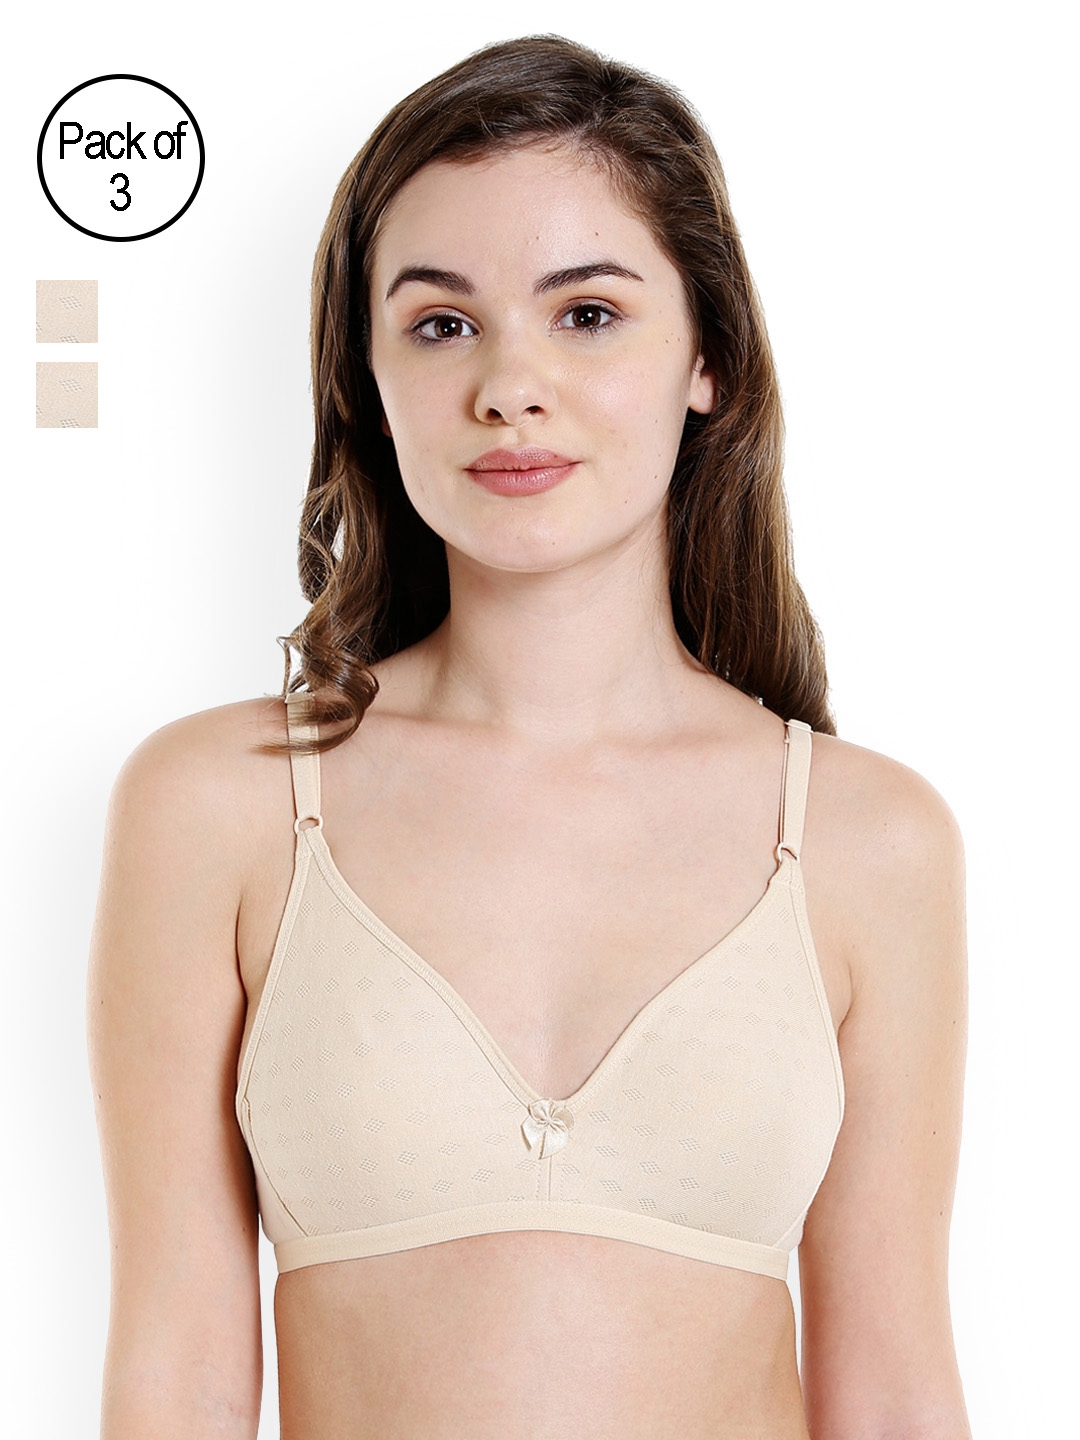 Buy BODYCARE Pack Of 3 Beige Solid Seamless Cup Bra In Skin Colour - Bra  for Women 8340607